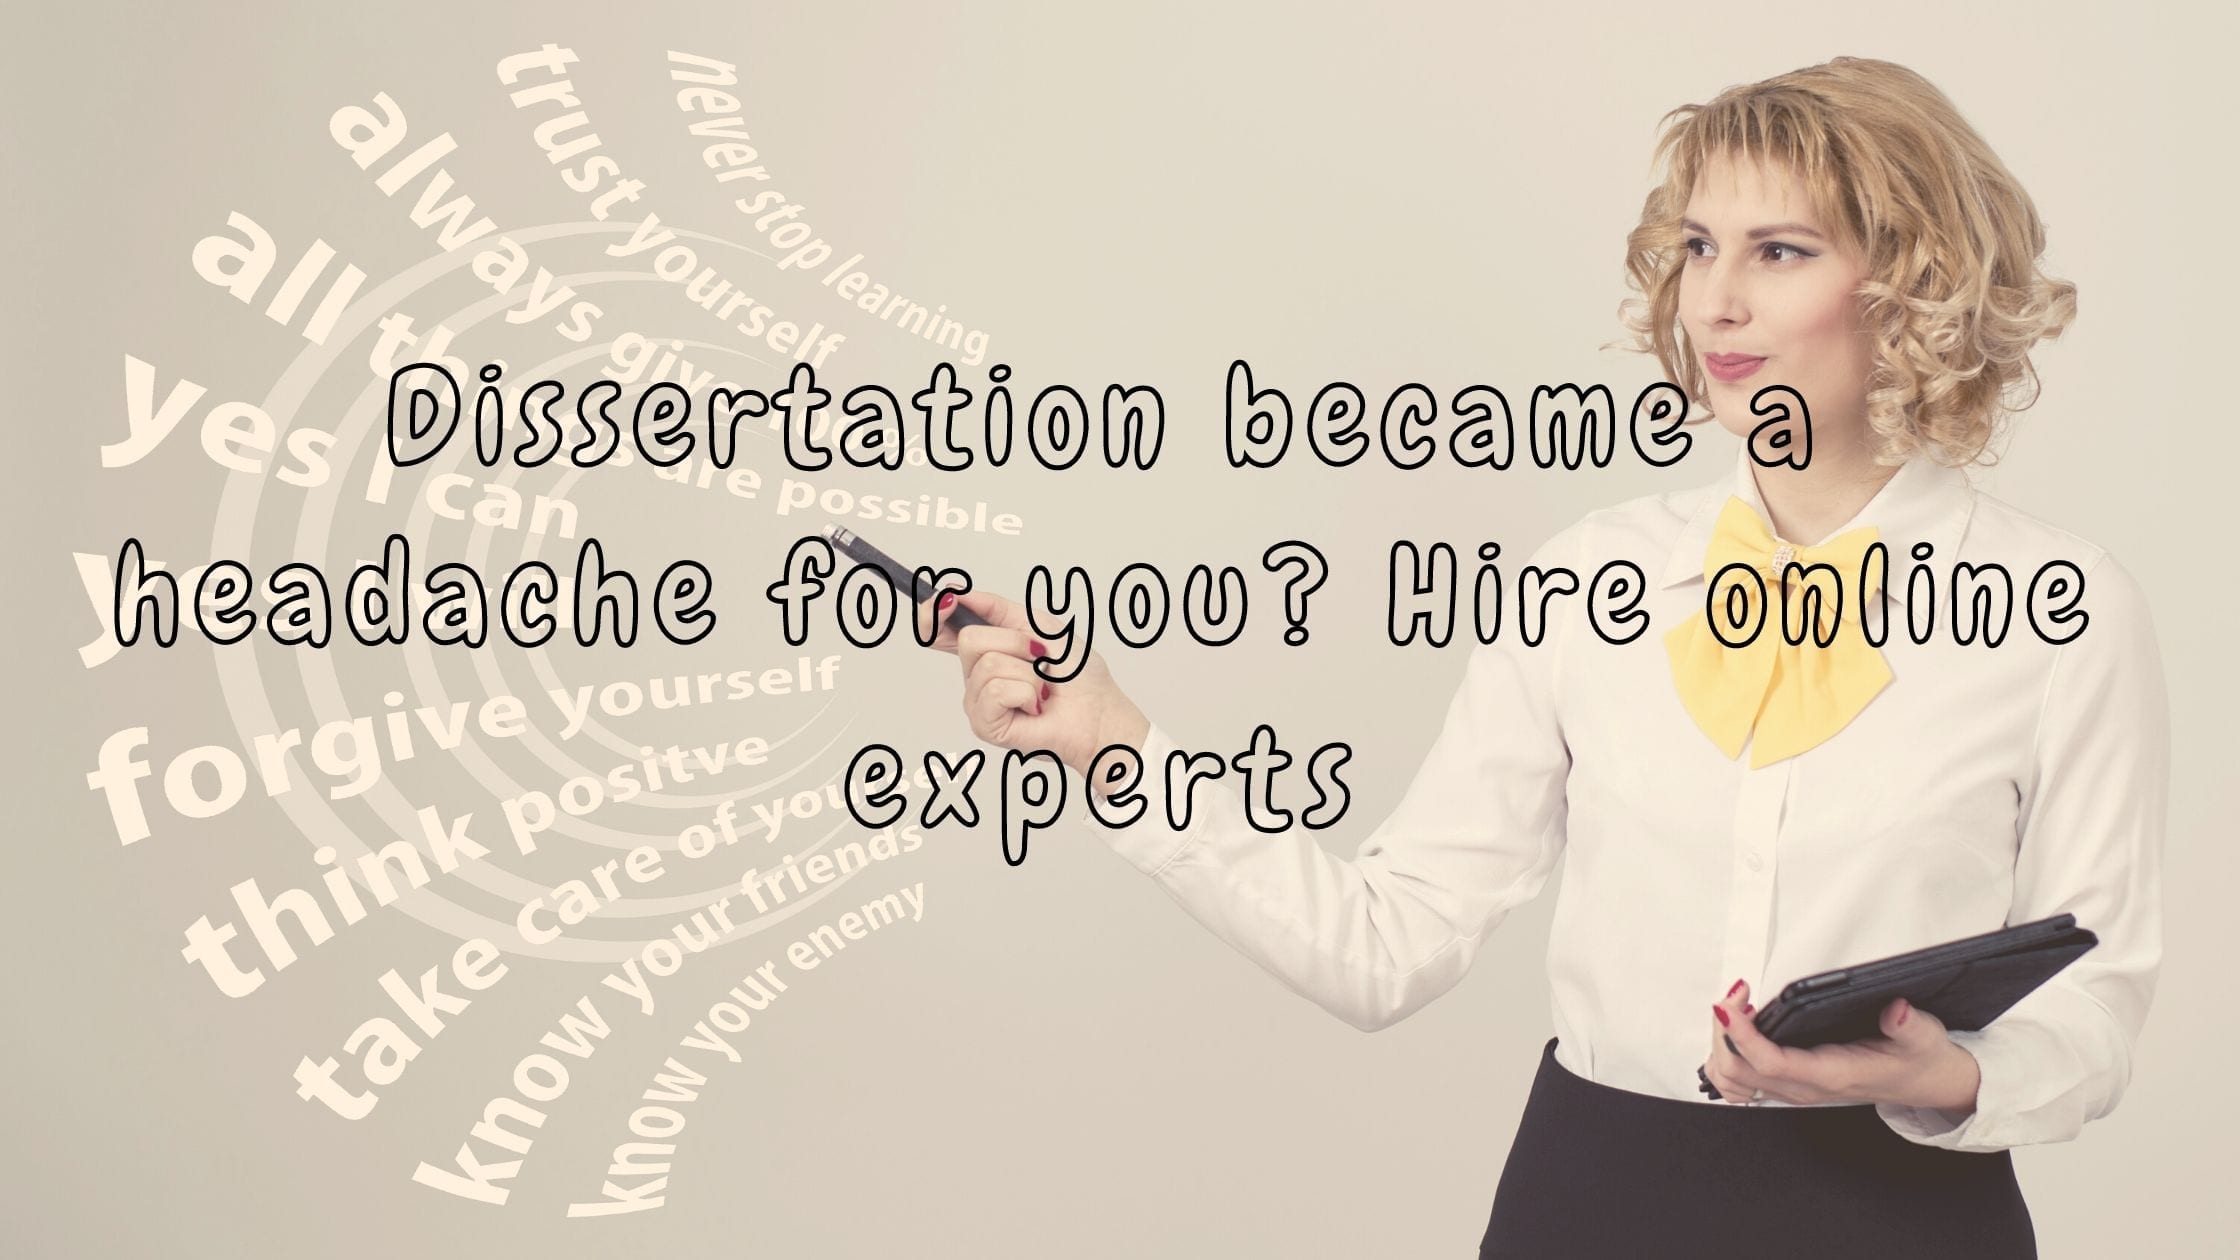 Dissertation became a headache for you? Hire online experts - My URL Pro